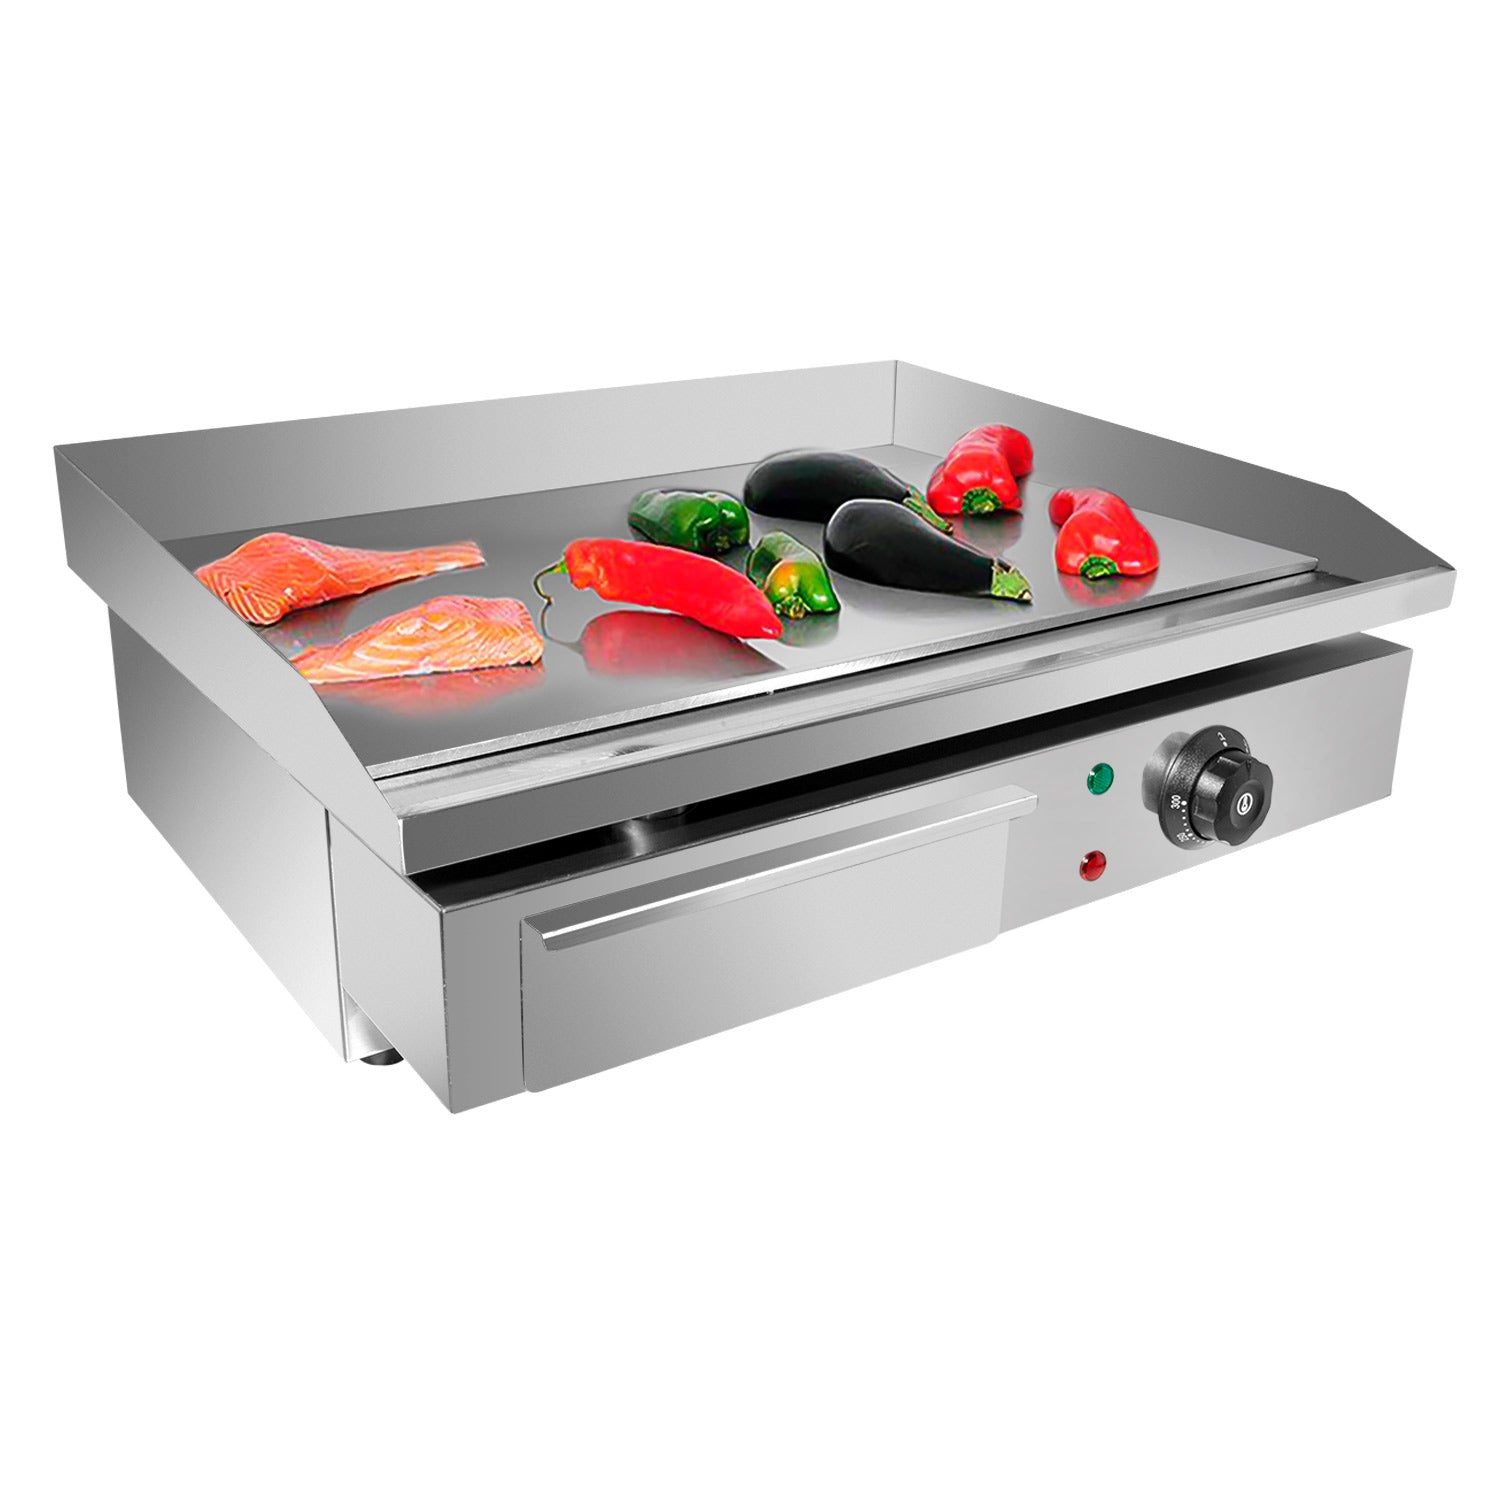 ALDKitchen Flat Top Griddle, Electric Griddle with Manual Control, Teppanyaki Grill